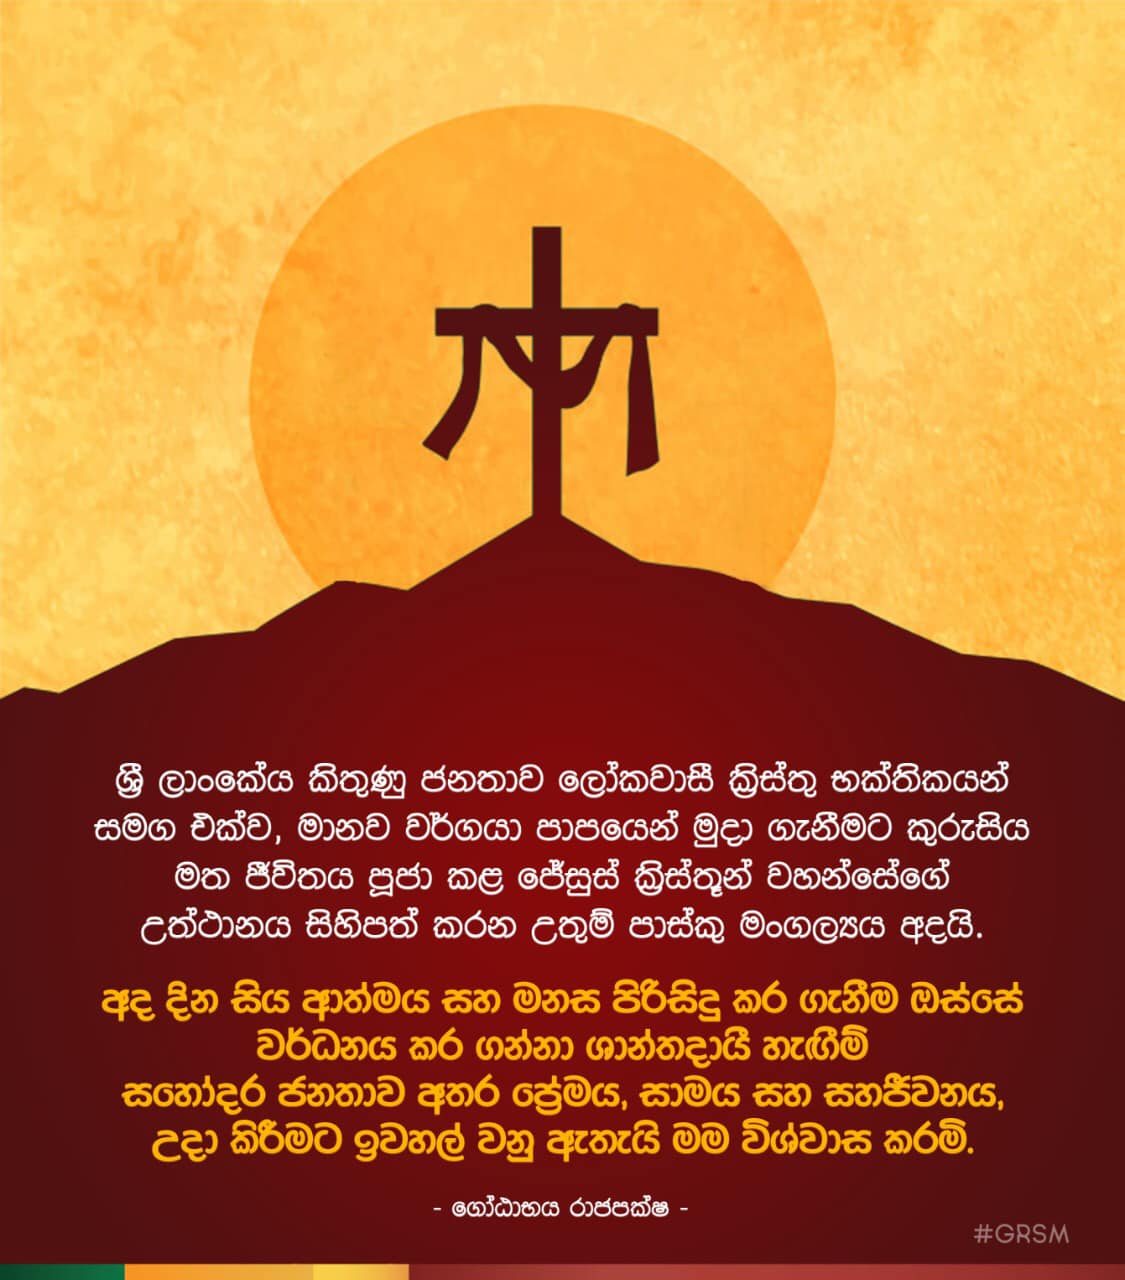 The Christian community of Sri Lanka, together with their brethren all over the world celebrates Easter